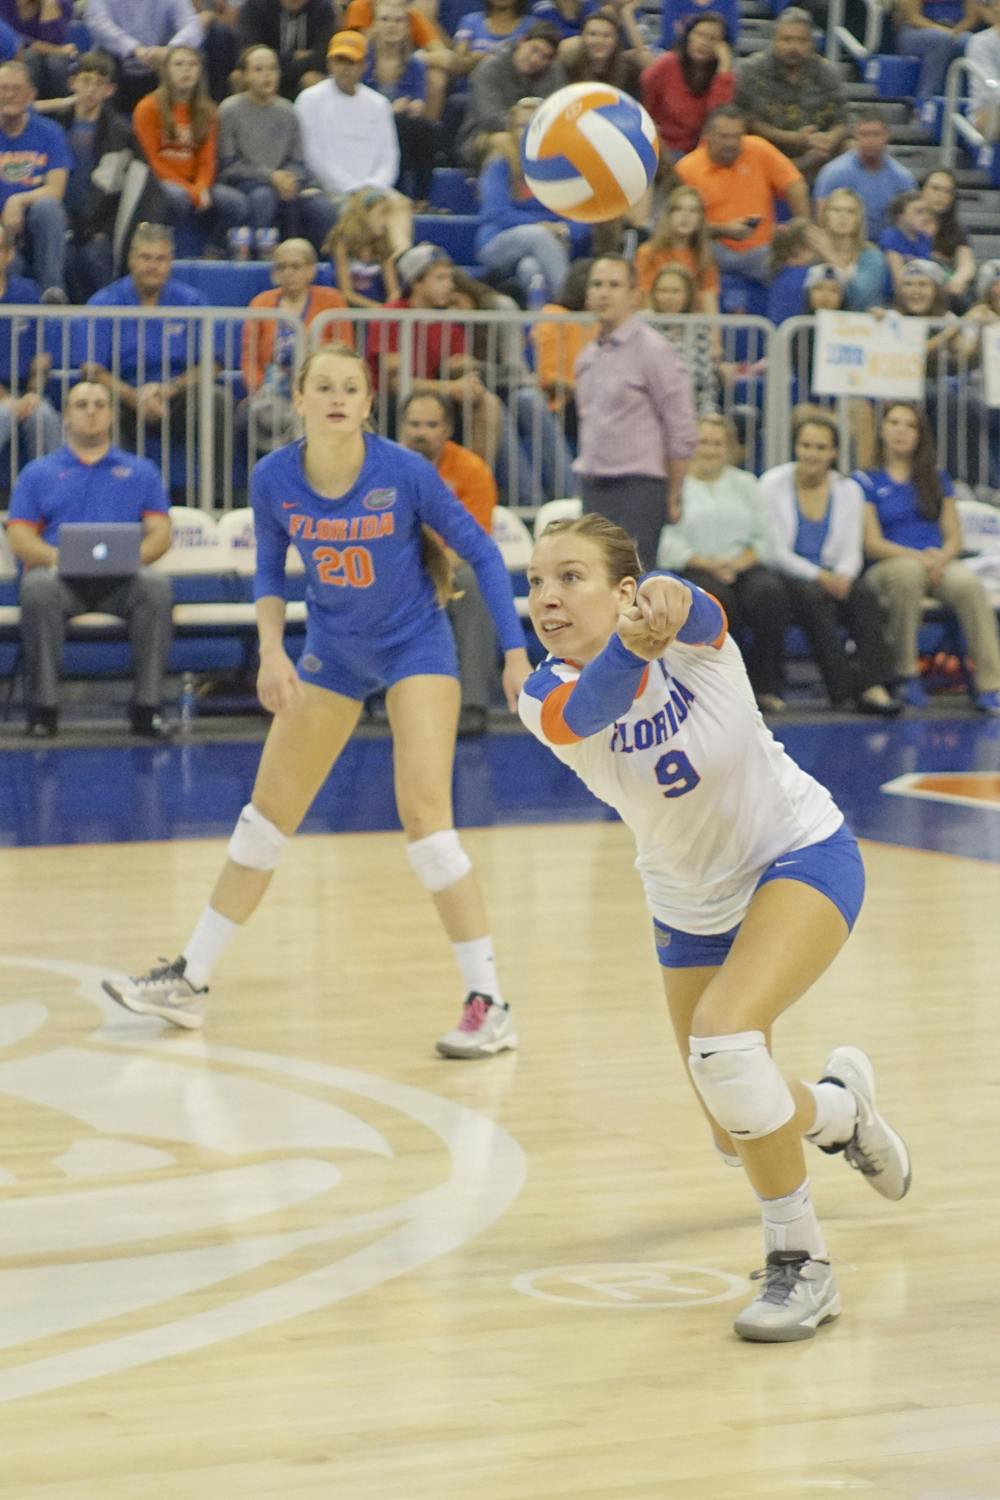 <p>UF outside hitter Ziva Recek digs a ball during Florida's 3-0 win against Alabama on Nov. 13, 2015, in the O'Connell Center.</p>